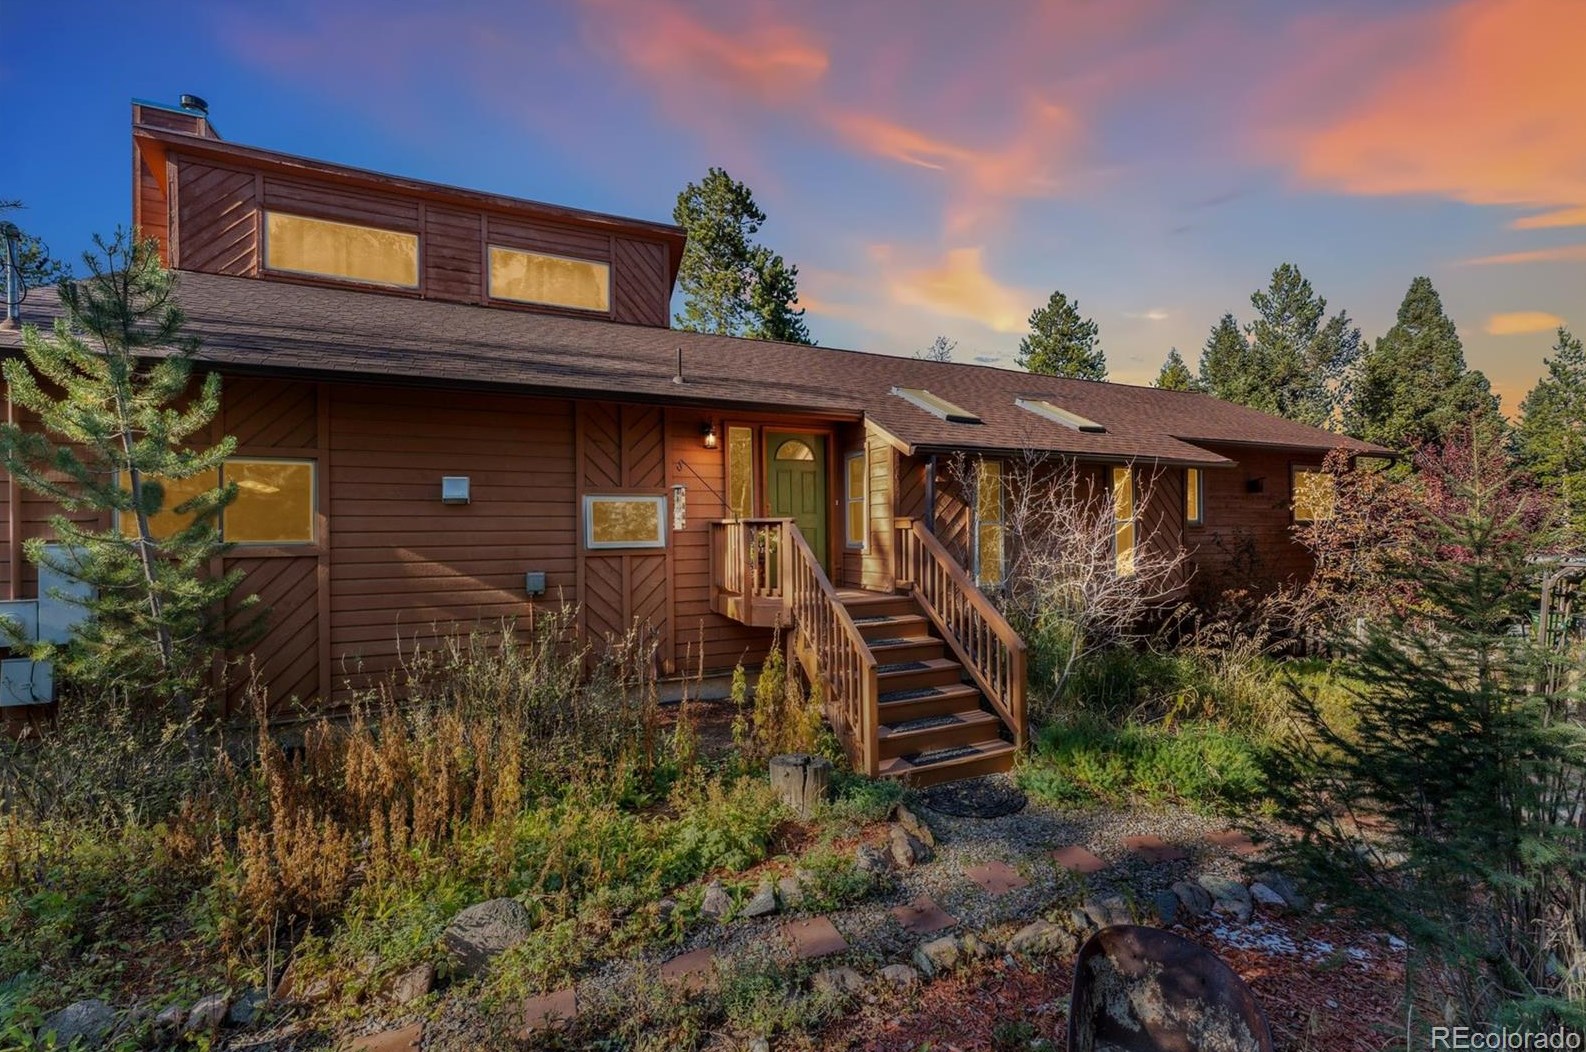 27467 Timber Trail, Conifer, CO 80433